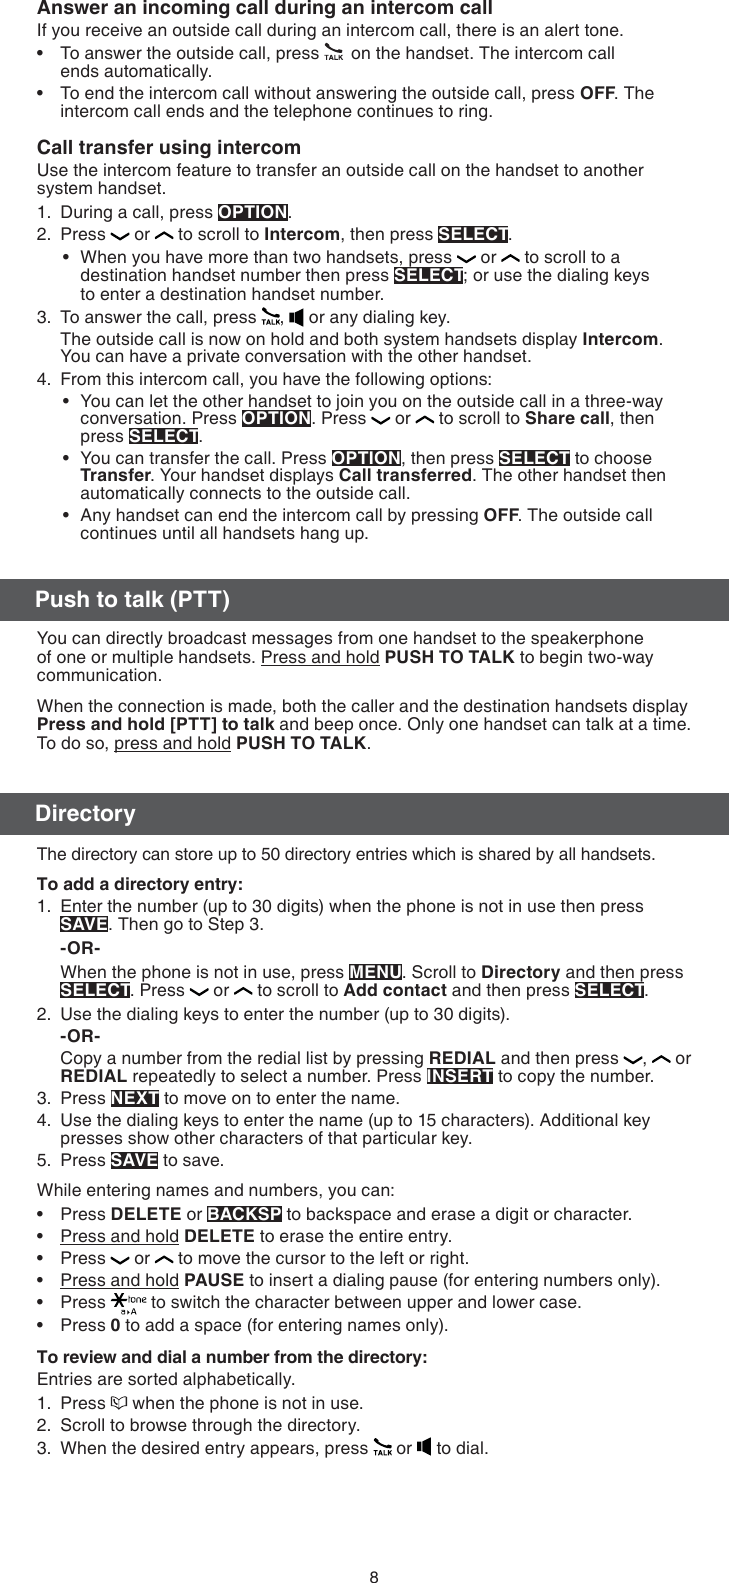 8Push to talk (PTT)DirectoryAnswer an incoming call during an intercom callIf you receive an outside call during an intercom call, there is an alert tone.To answer the outside call, press   on the handset. The intercom call  ends automatically.To end the intercom call without answering the outside call, press OFF. The intercom call ends and the telephone continues to ring.Call transfer using intercomUse the intercom feature to transfer an outside call on the handset to another system handset.During a call, press OPTION. Press   or   to scroll to Intercom, then press SELECT. When you have more than two handsets, press   or   to scroll to a destination handset number then press SELECT; or use the dialing keys  to enter a destination handset number.To answer the call, press  ,   or any dialing key.The outside call is now on hold and both system handsets display Intercom. You can have a private conversation with the other handset.From this intercom call, you have the following options:You can let the other handset to join you on the outside call in a three-way conversation. Press OPTION. Press   or   to scroll to Share call, then press SELECT.You can transfer the call. Press OPTION, then press SELECT to choose Transfer. Your handset displays Call transferred. The other handset then automatically connects to the outside call.Any handset can end the intercom call by pressing OFF. The outside call continues until all handsets hang up.••1.2.•3.4.•••You can directly broadcast messages from one handset to the speakerphone of one or multiple handsets. Press and hold PUSH TO TALK to begin two-way communication.When the connection is made, both the caller and the destination handsets display Press and hold [PTT] to talk and beep once. Only one handset can talk at a time. To do so, press and hold PUSH TO TALK.The directory can store up to 50 directory entries which is shared by all handsets.To add a directory entry:Enter the number (up to 30 digits) when the phone is not in use then press SAVE. Then go to Step 3. -OR-When the phone is not in use, press MENU. Scroll to Directory and then press SELECT. Press   or   to scroll to Add contact and then press SELECT.Use the dialing keys to enter the number (up to 30 digits).-OR-Copy a number from the redial list by pressing REDIAL and then press  ,   or REDIAL repeatedly to select a number. Press INSERT to copy the number.Press NEXT to move on to enter the name.Use the dialing keys to enter the name (up to 15 characters). Additional key presses show other characters of that particular key.Press SAVE to save.While entering names and numbers, you can:Press DELETE or BACKSP to backspace and erase a digit or character.Press and hold DELETE to erase the entire entry.Press   or   to move the cursor to the left or right. Press and hold PAUSE to insert a dialing pause (for entering numbers only).Press   to switch the character between upper and lower case.Press 0 to add a space (for entering names only).To review and dial a number from the directory:Entries are sorted alphabetically.Press   when the phone is not in use.Scroll to browse through the directory.When the desired entry appears, press   or   to dial.1.2.3.4.5.••••••1.2.3.